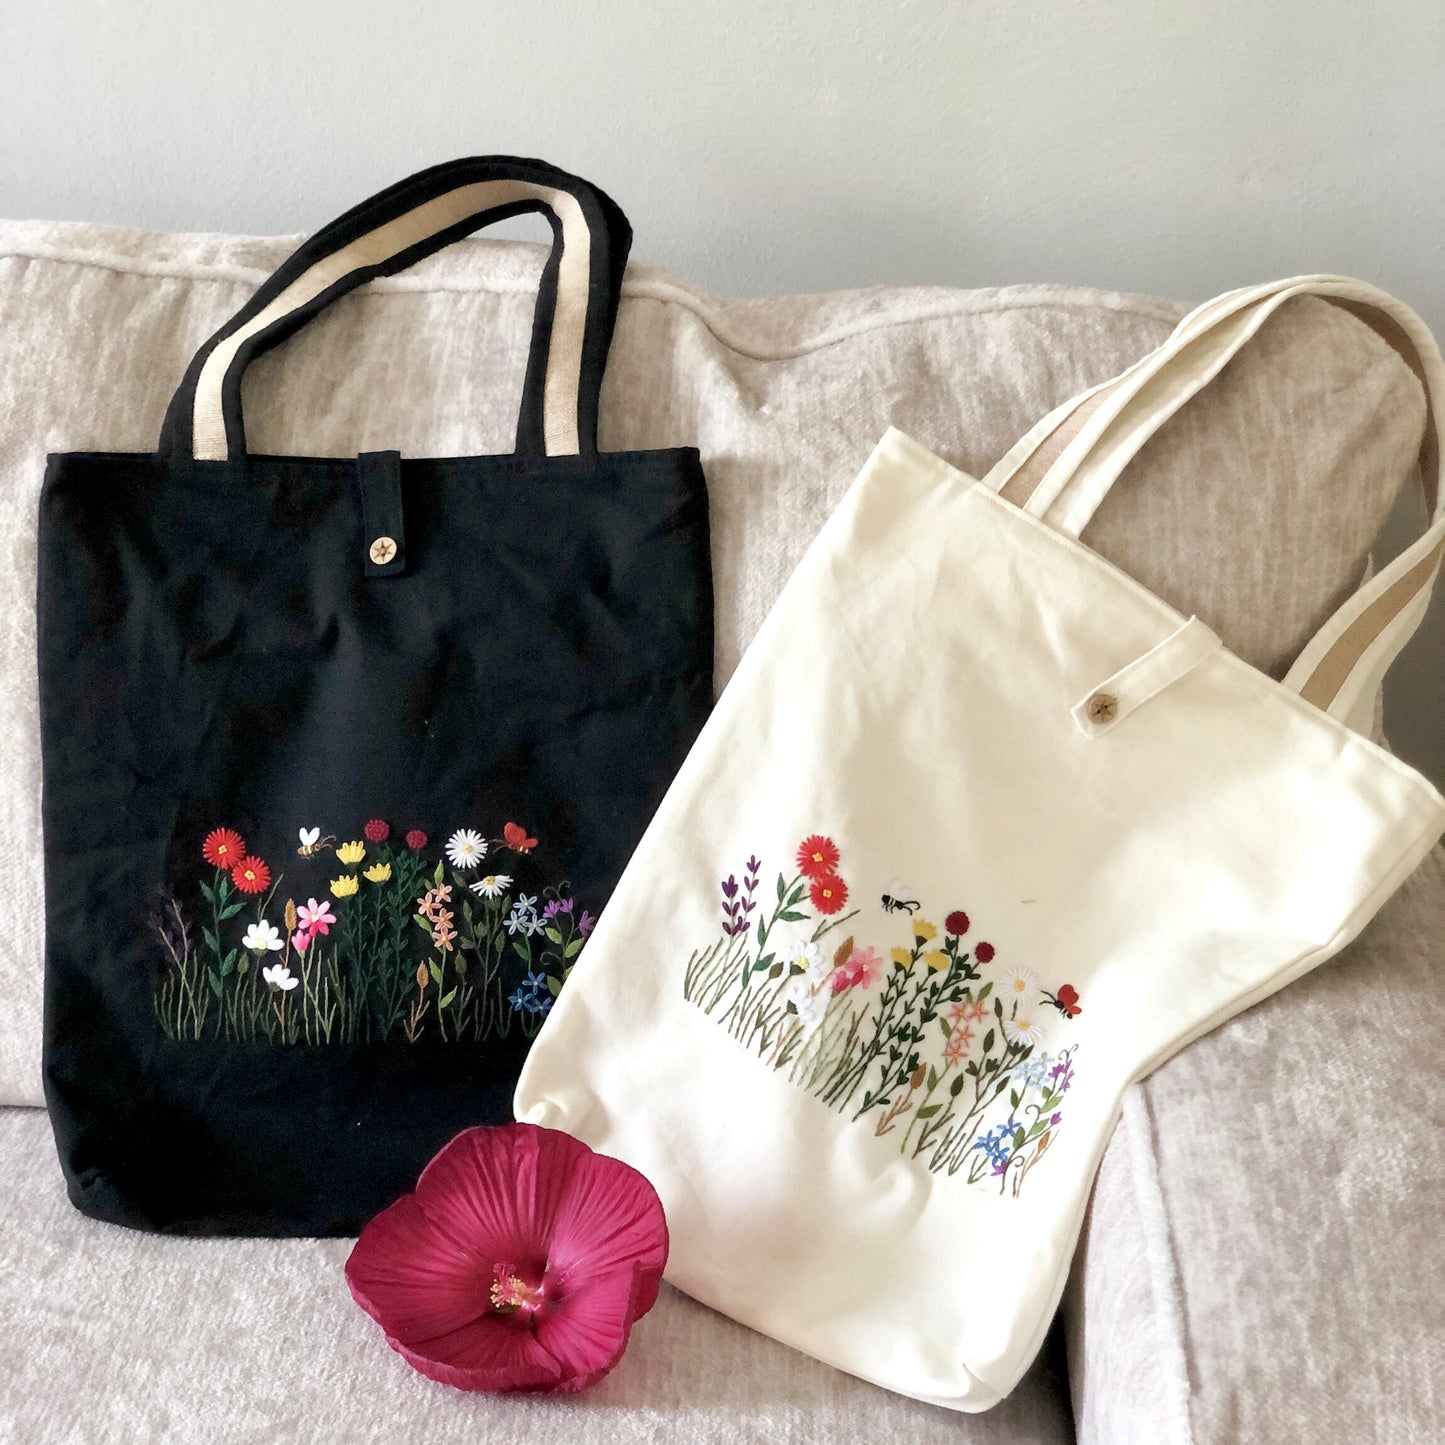 Ready To Ship, Handmade Embroidery Floral Tote Bag Wild Flowers